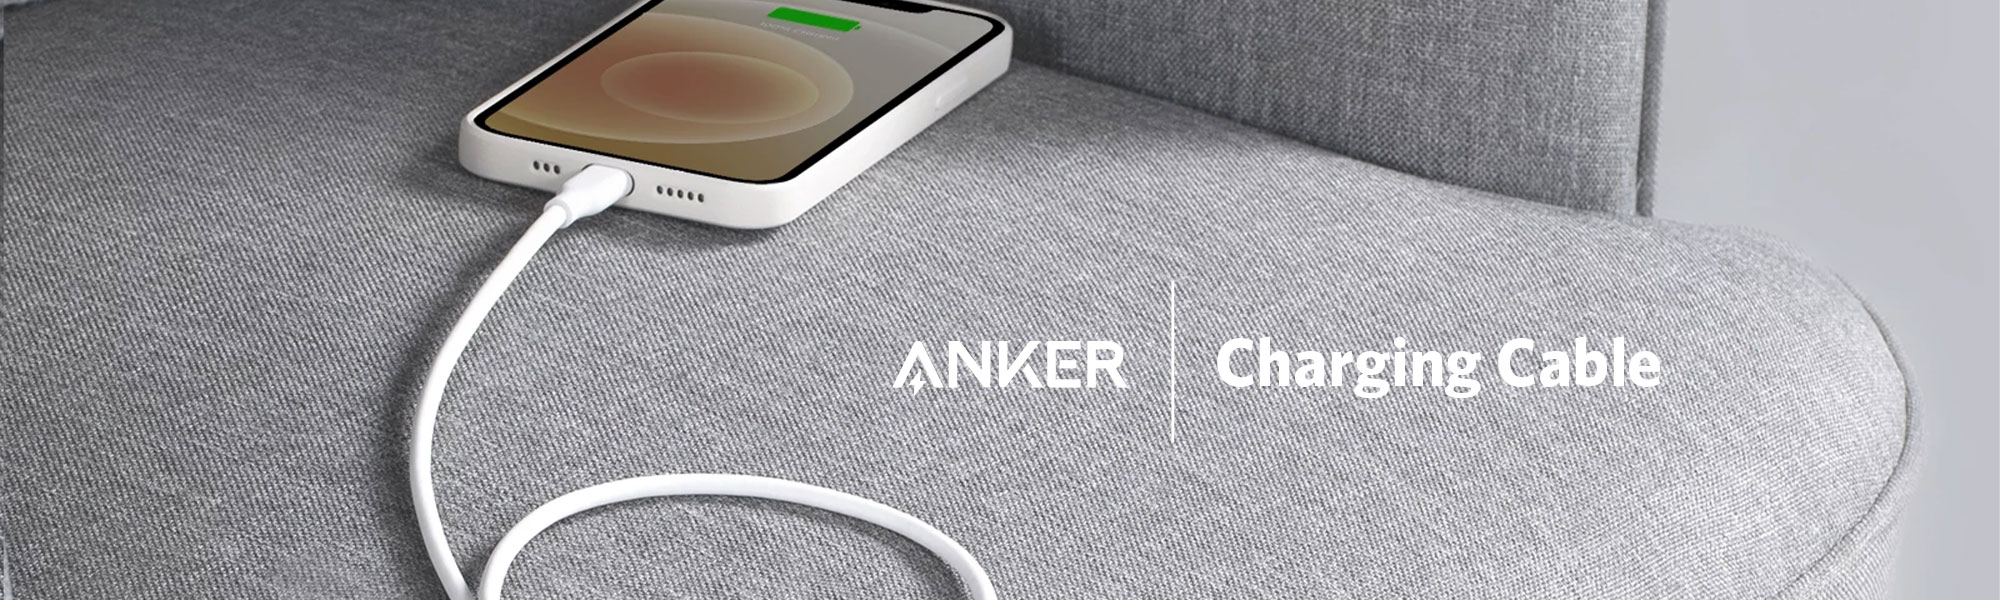 Data Cable Type: Everything You Need to Know Before Buying - Anker US